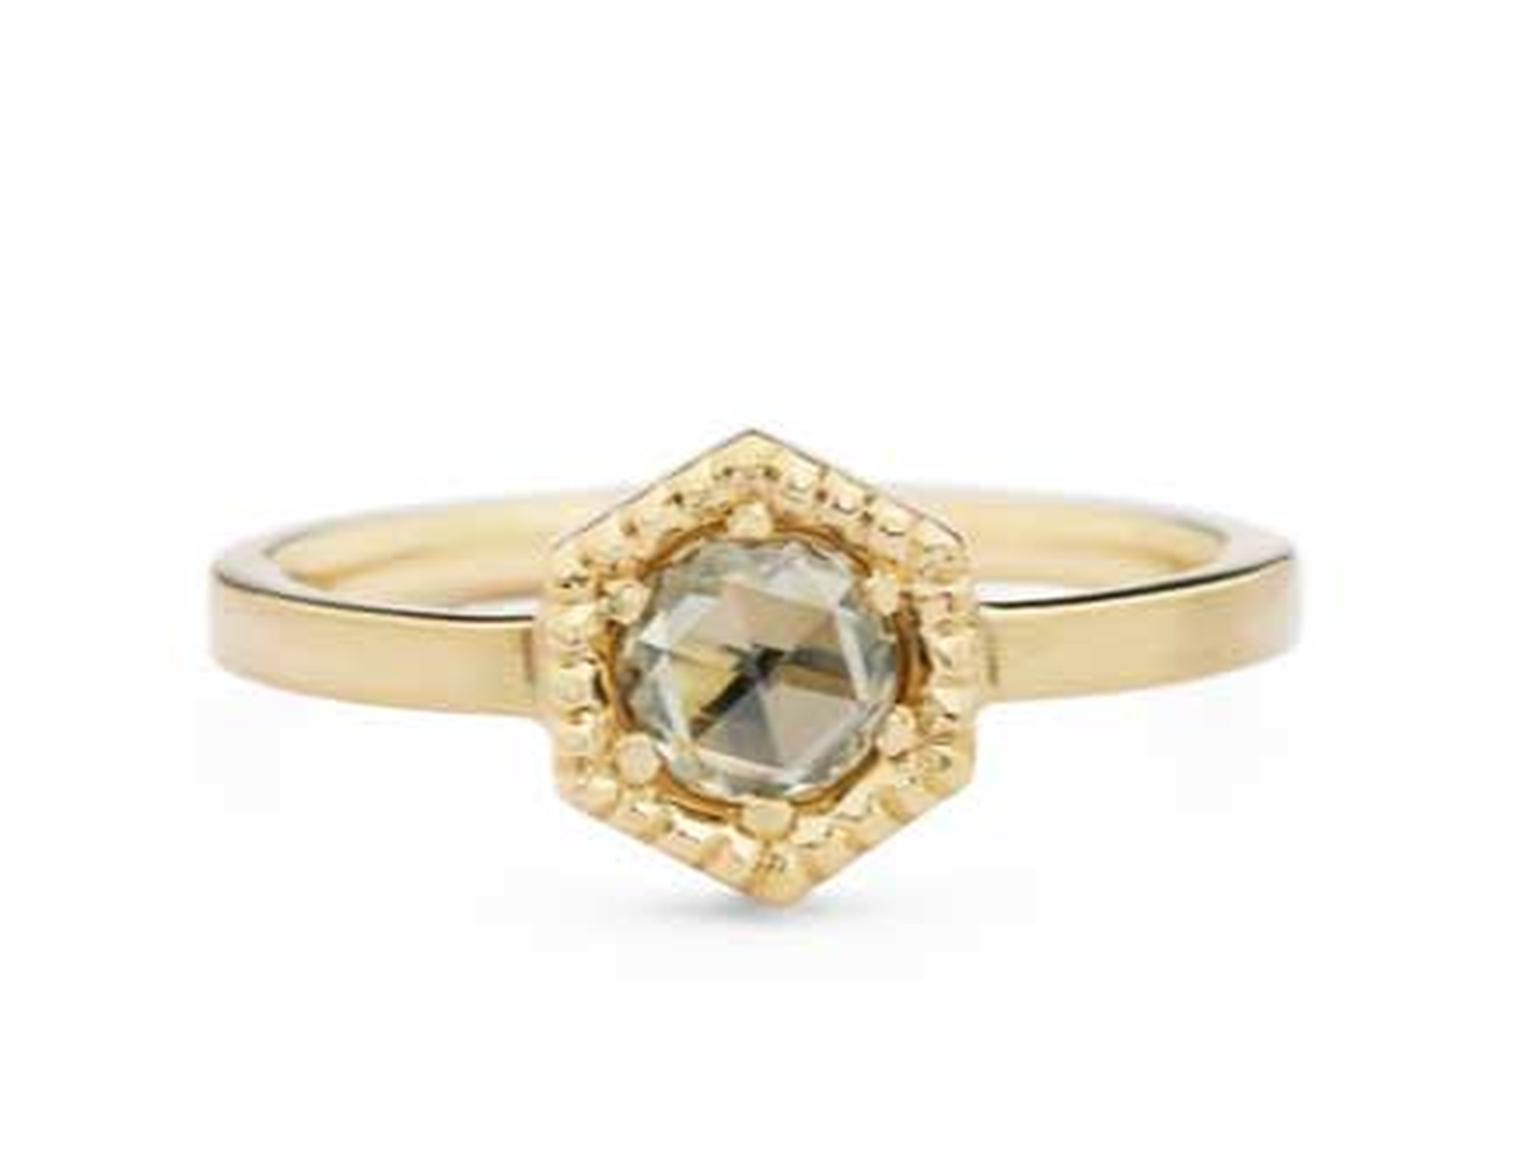 Jessica Poole Hexagon diamond engagement ring in brushed gold with milgrain edging, set with a cognac rose-cut diamond.